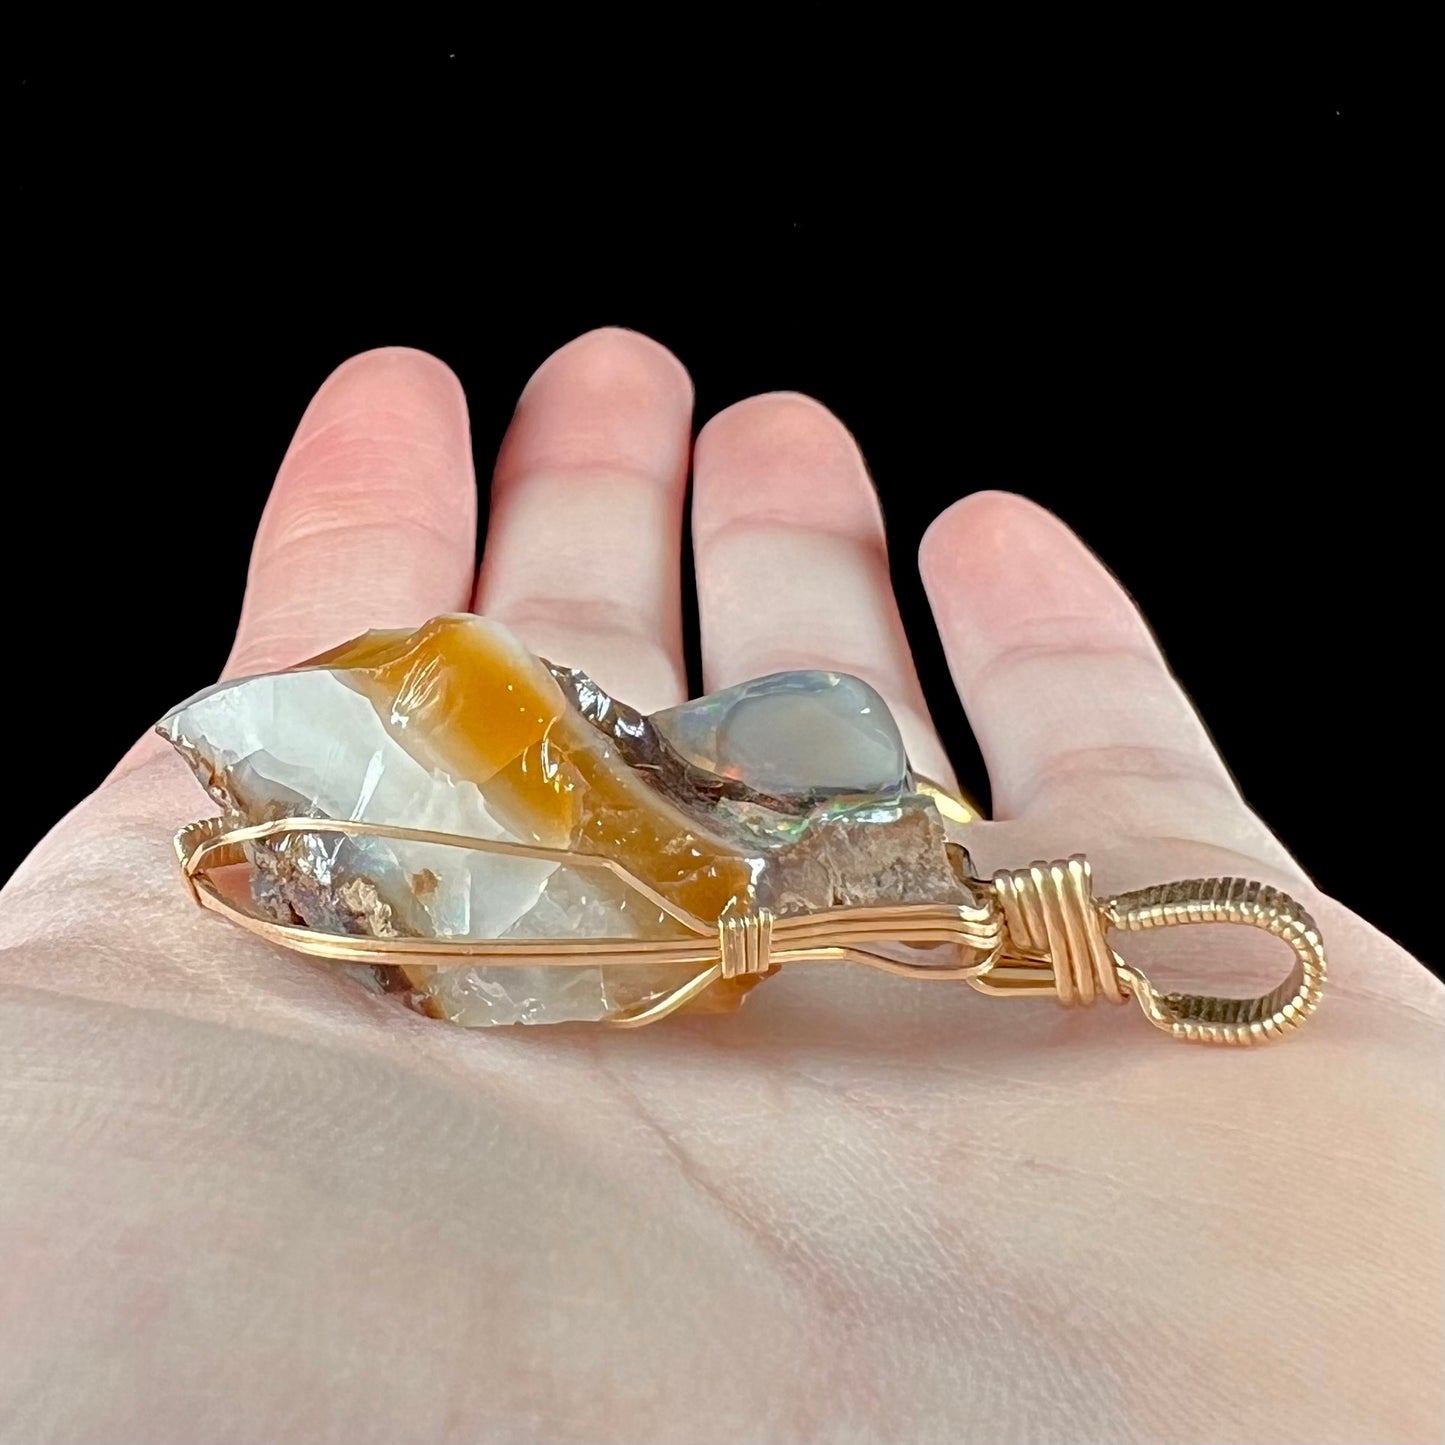 A gold filled wire wrapped pendant set with a natural Virgin Valley, Nevada opal crystal.